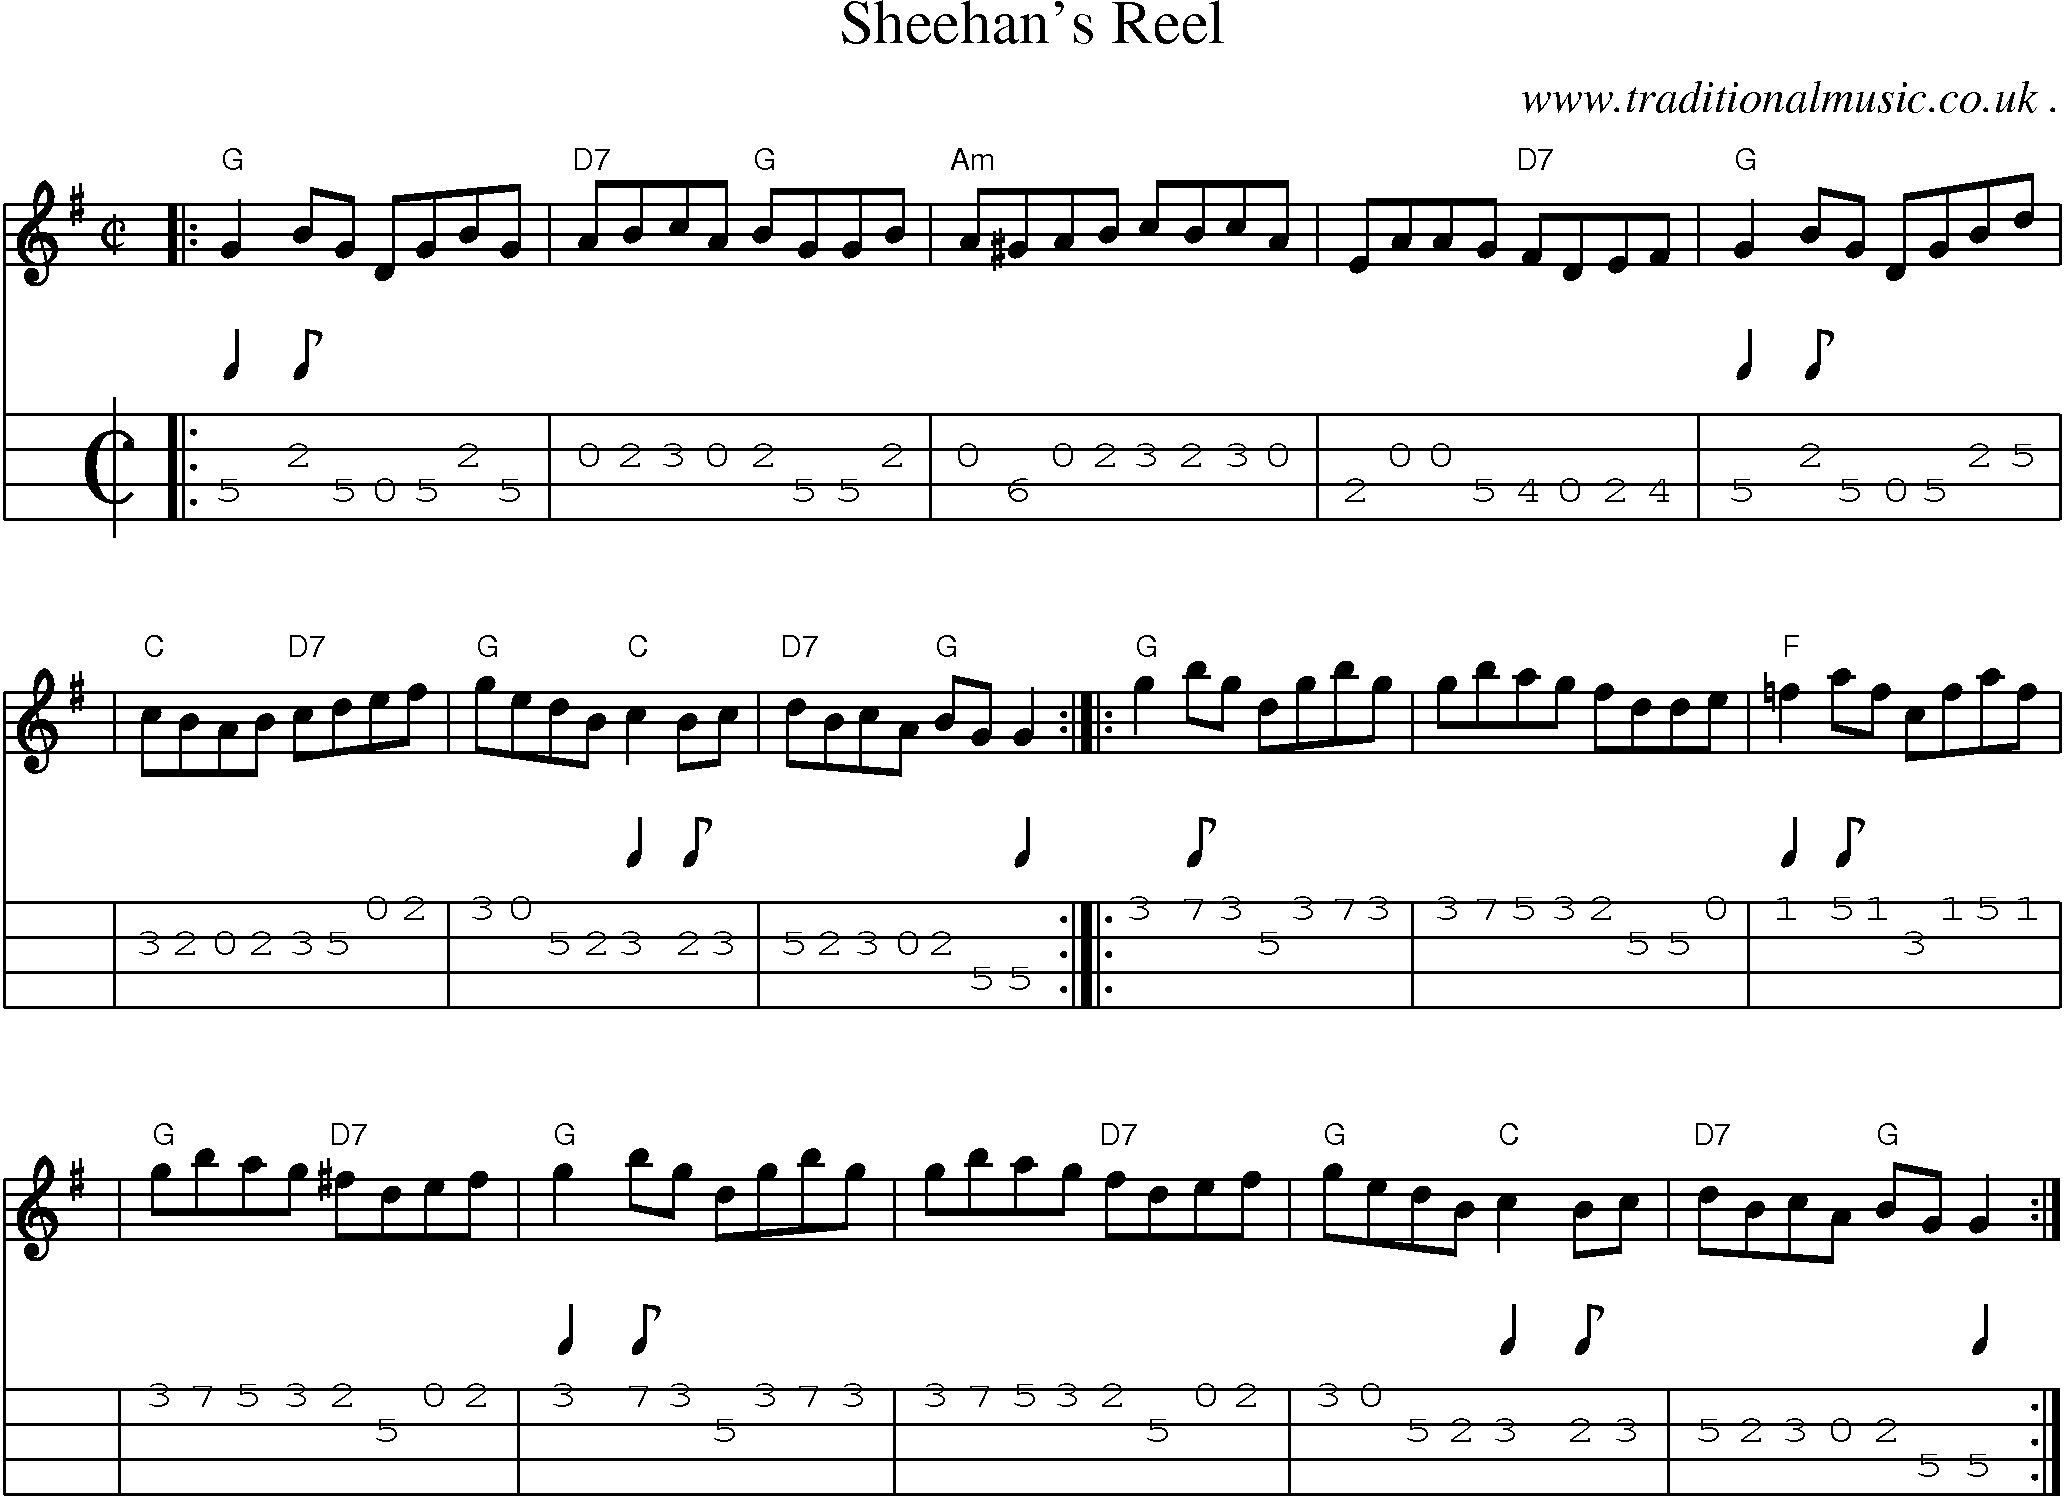 Sheet-music  score, Chords and Mandolin Tabs for Sheehans Reel